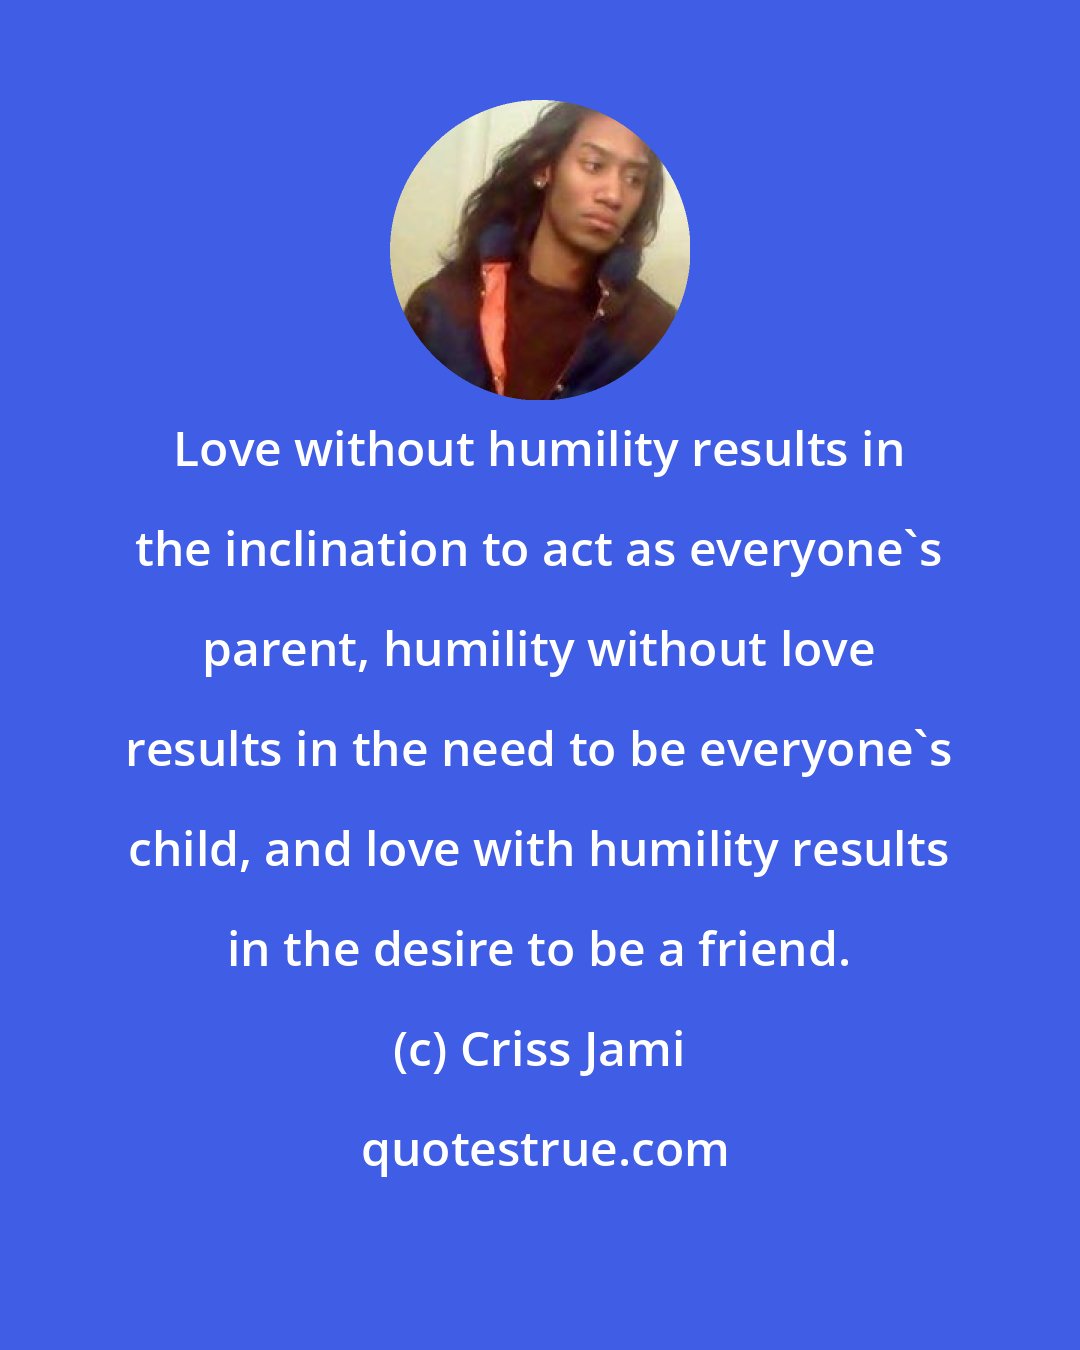 Criss Jami: Love without humility results in the inclination to act as everyone's parent, humility without love results in the need to be everyone's child, and love with humility results in the desire to be a friend.